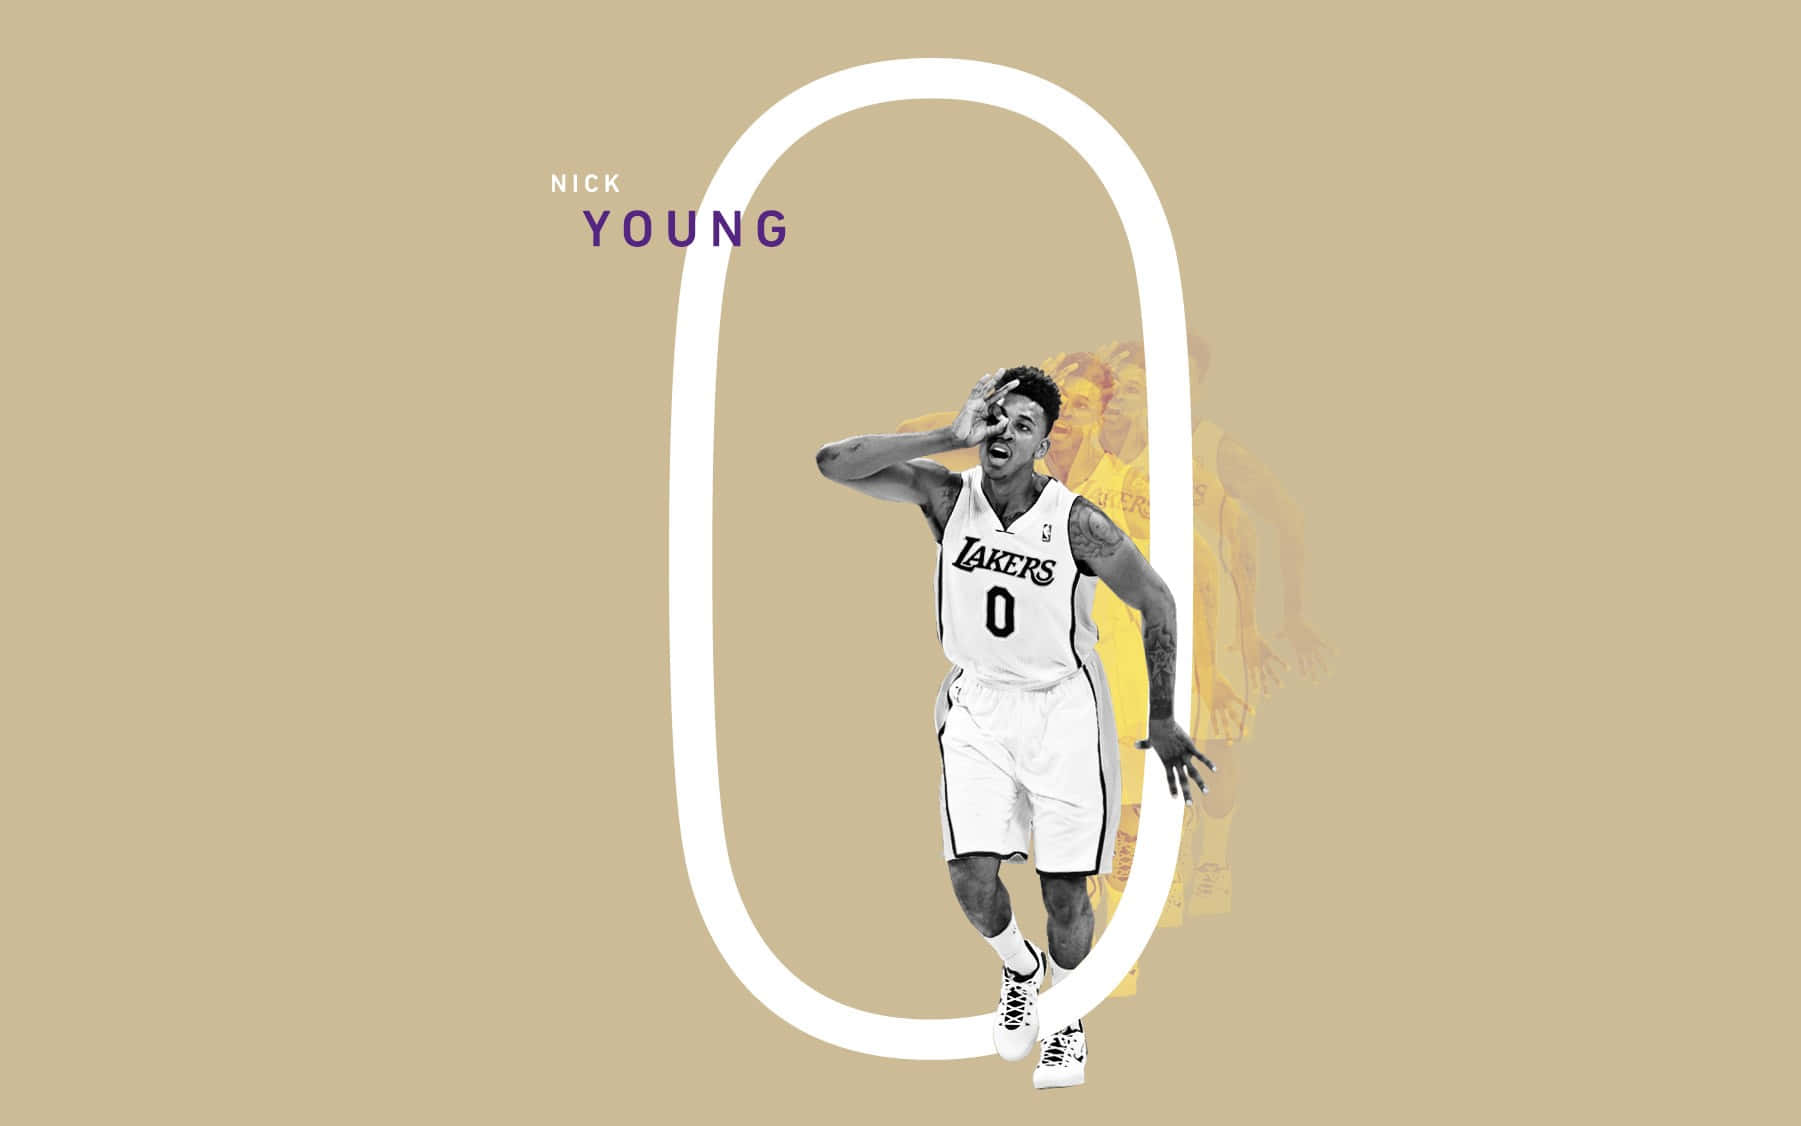 Nick Young Is Number Zero